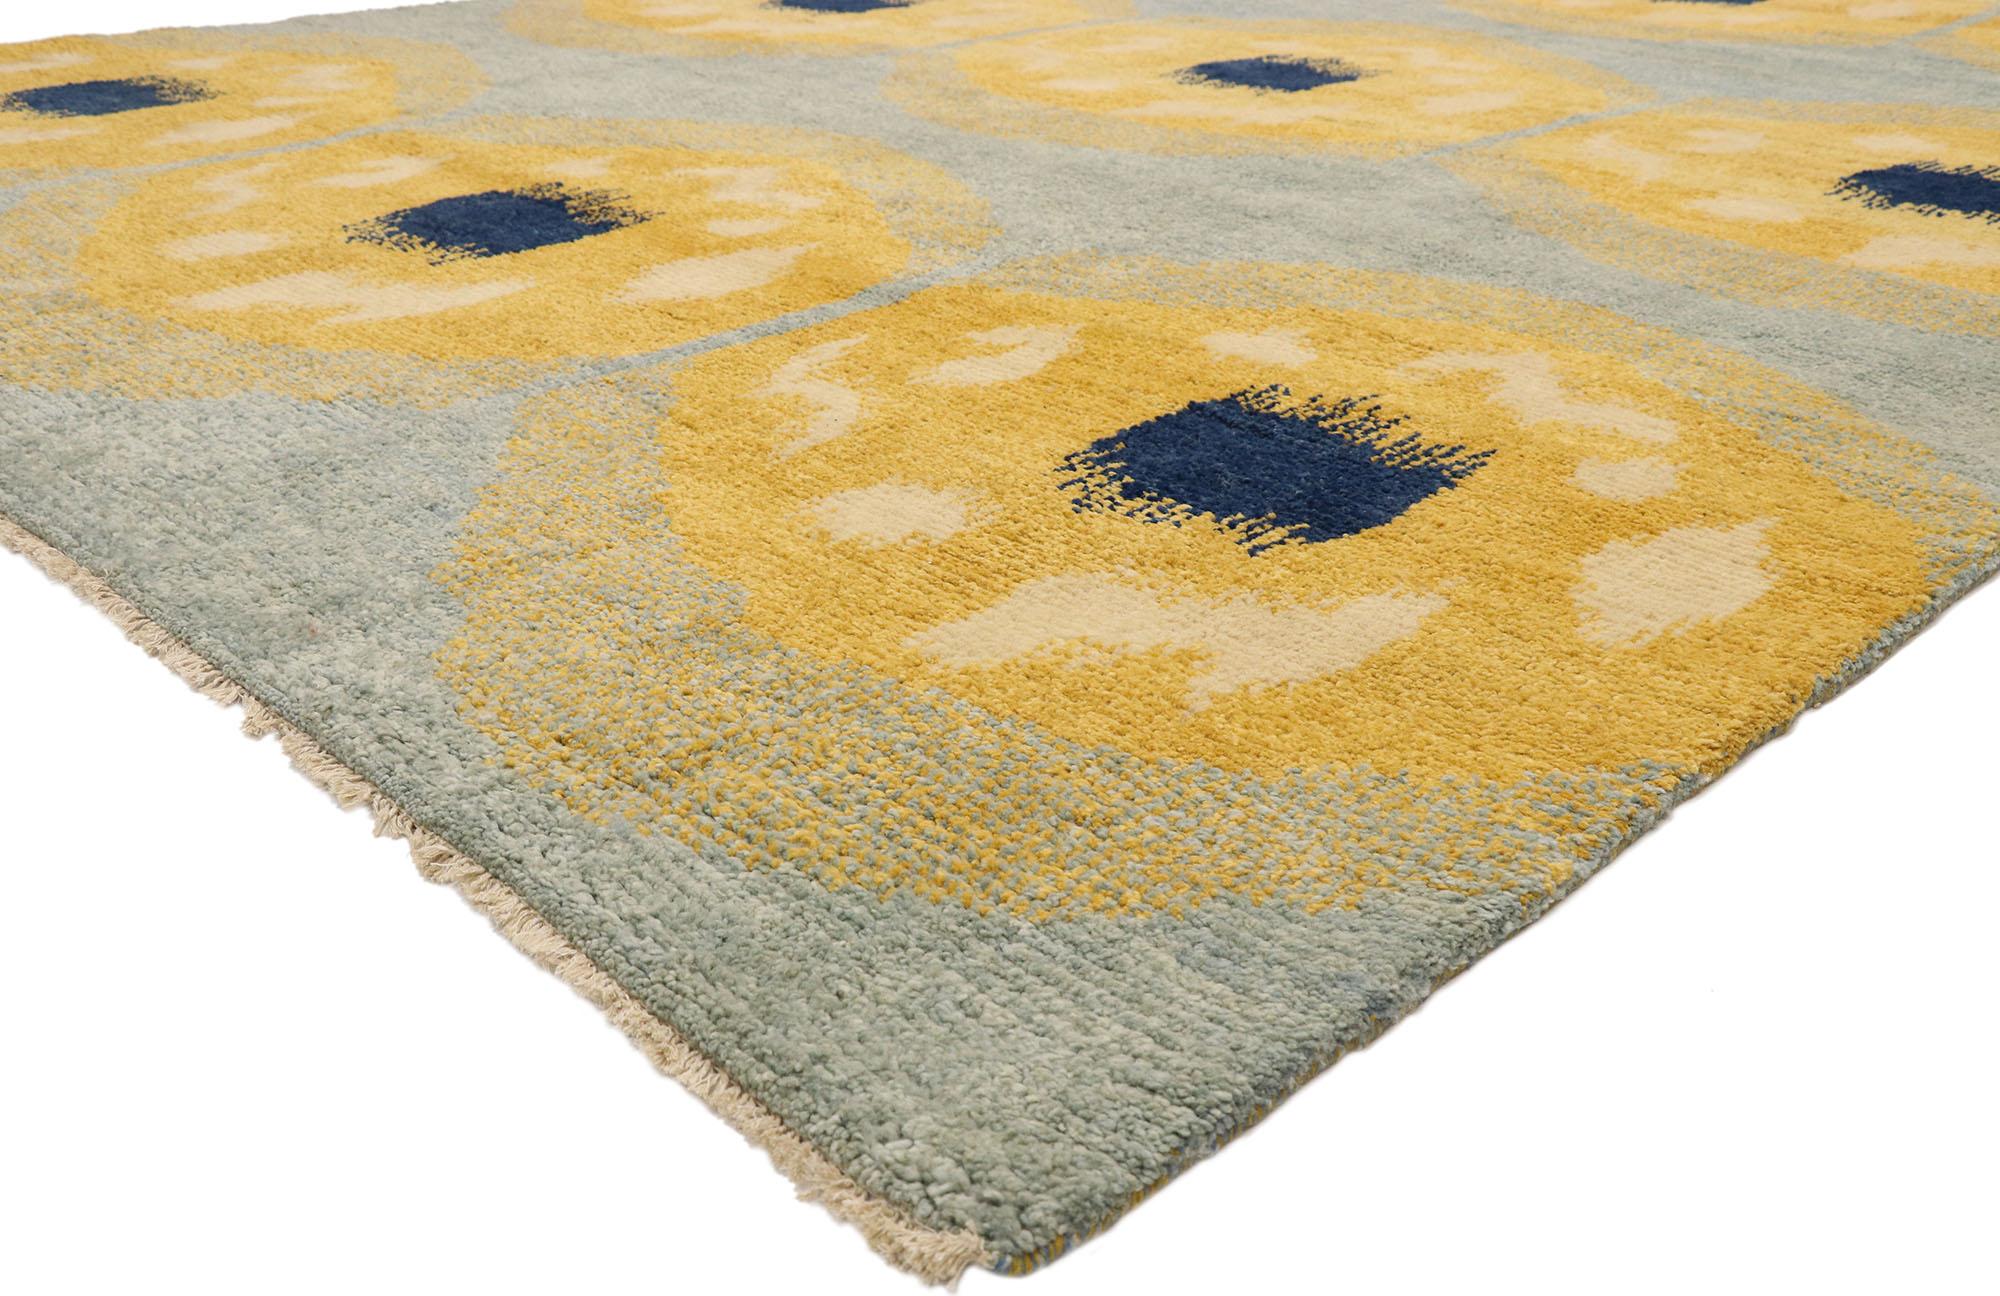 80567 Modern Moroccan Orphism Rug with Concentric Circles 10'02 x 13'09. Embark on a visual journey with our hand-knotted wool Moroccan area rug, a harmonious blend of Abstract Orphism and contemporary elegance. Inspired by the mesmerizing works of